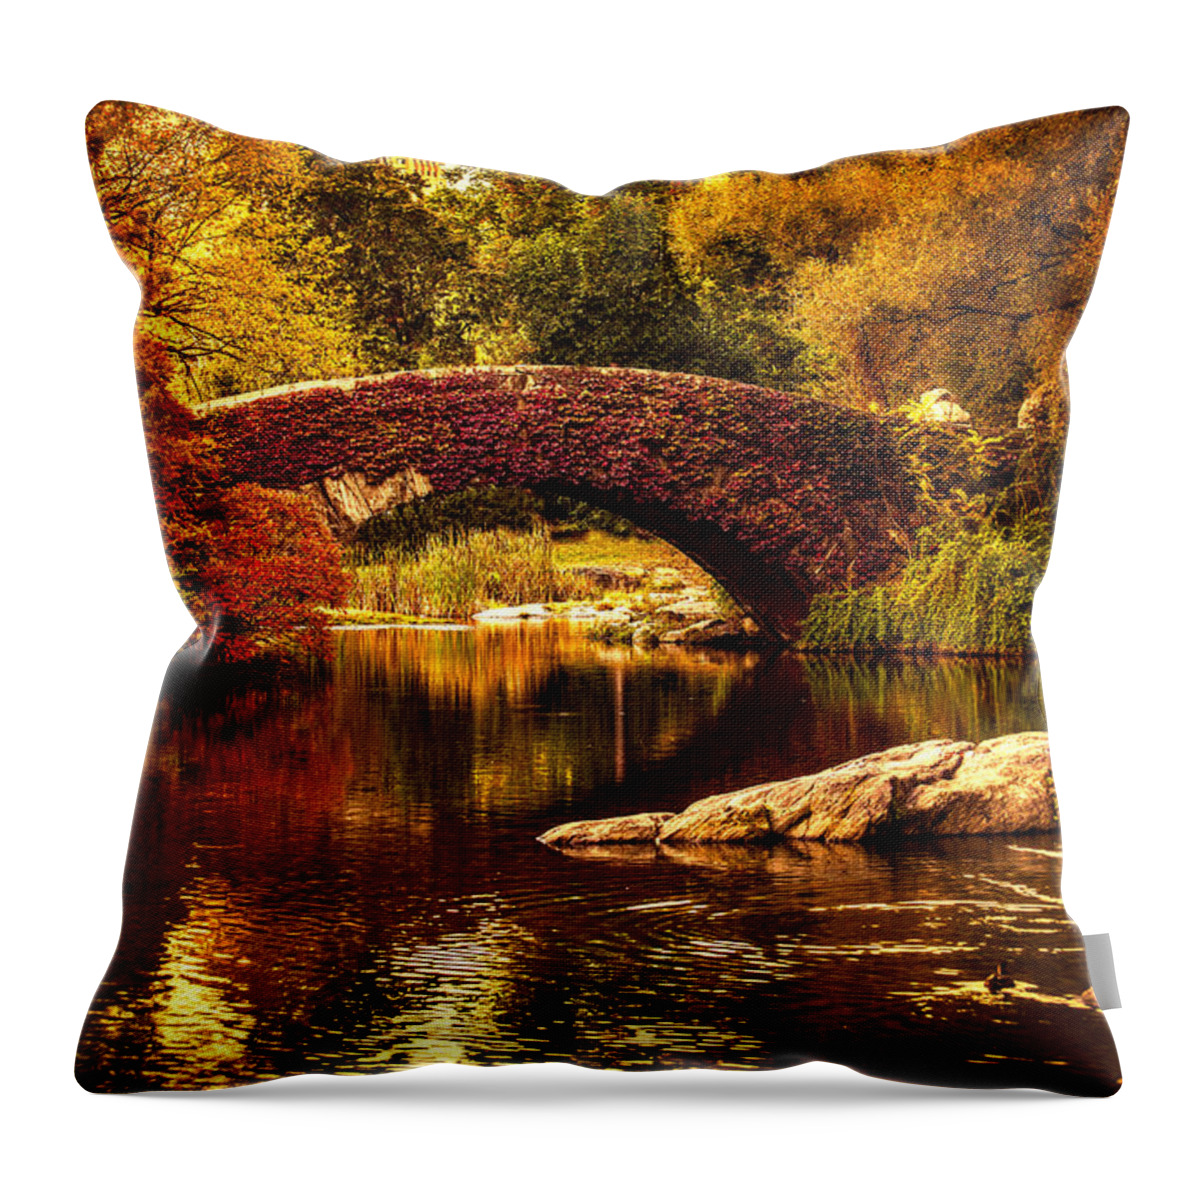 Gapstow Throw Pillow featuring the photograph The Gapstow Bridge by Chris Lord